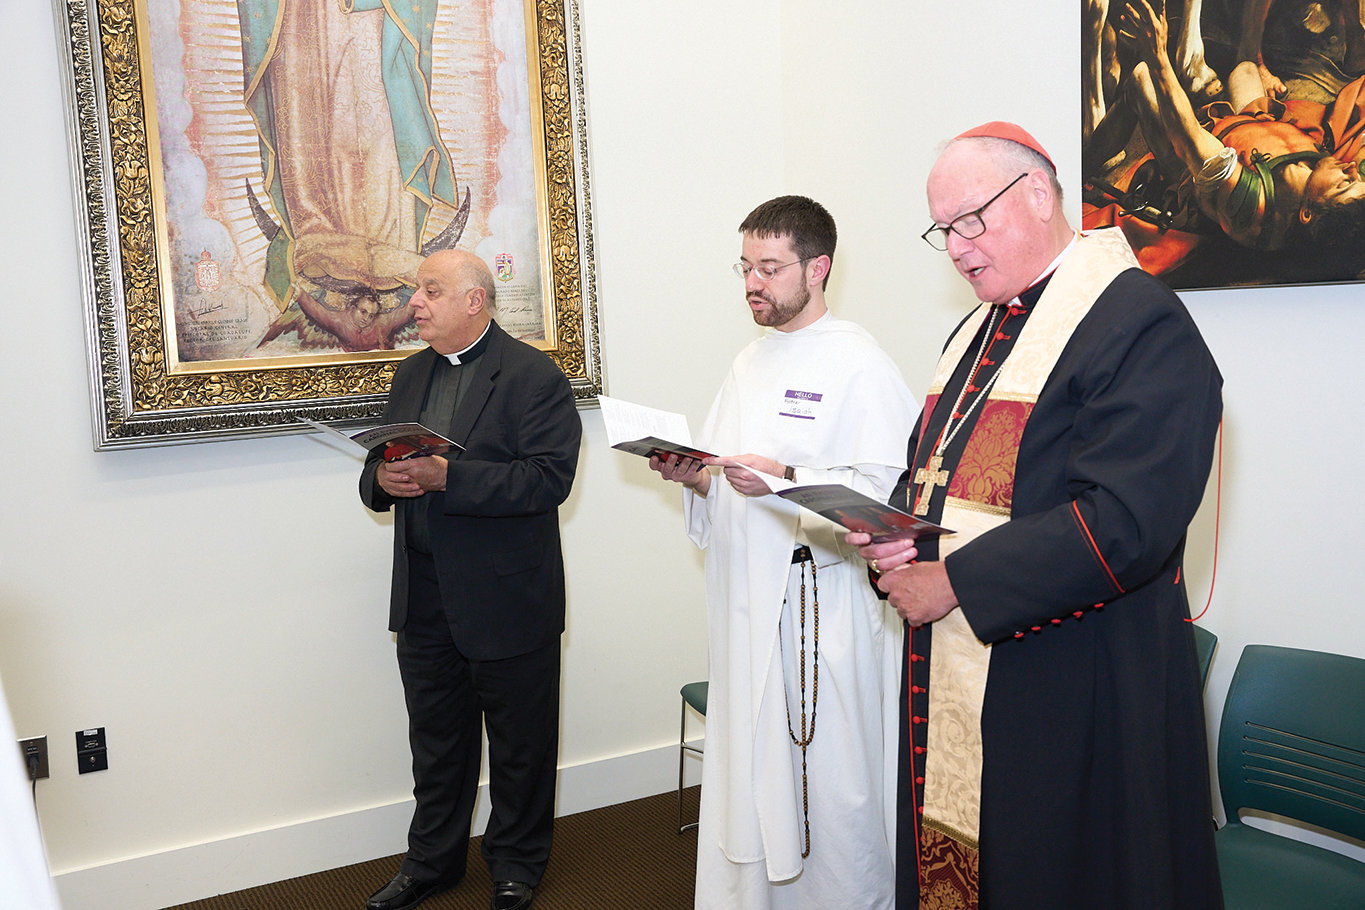 Msgr. Joseph LaMorte, vicar general and moderator of the curia for the archdiocese; Father Isaiah Beiter, O.P., chaplain of the Cardinal Egan Catholic Center at NYU; and Cardinal Dolan lead students and guests at prayer during vespers.